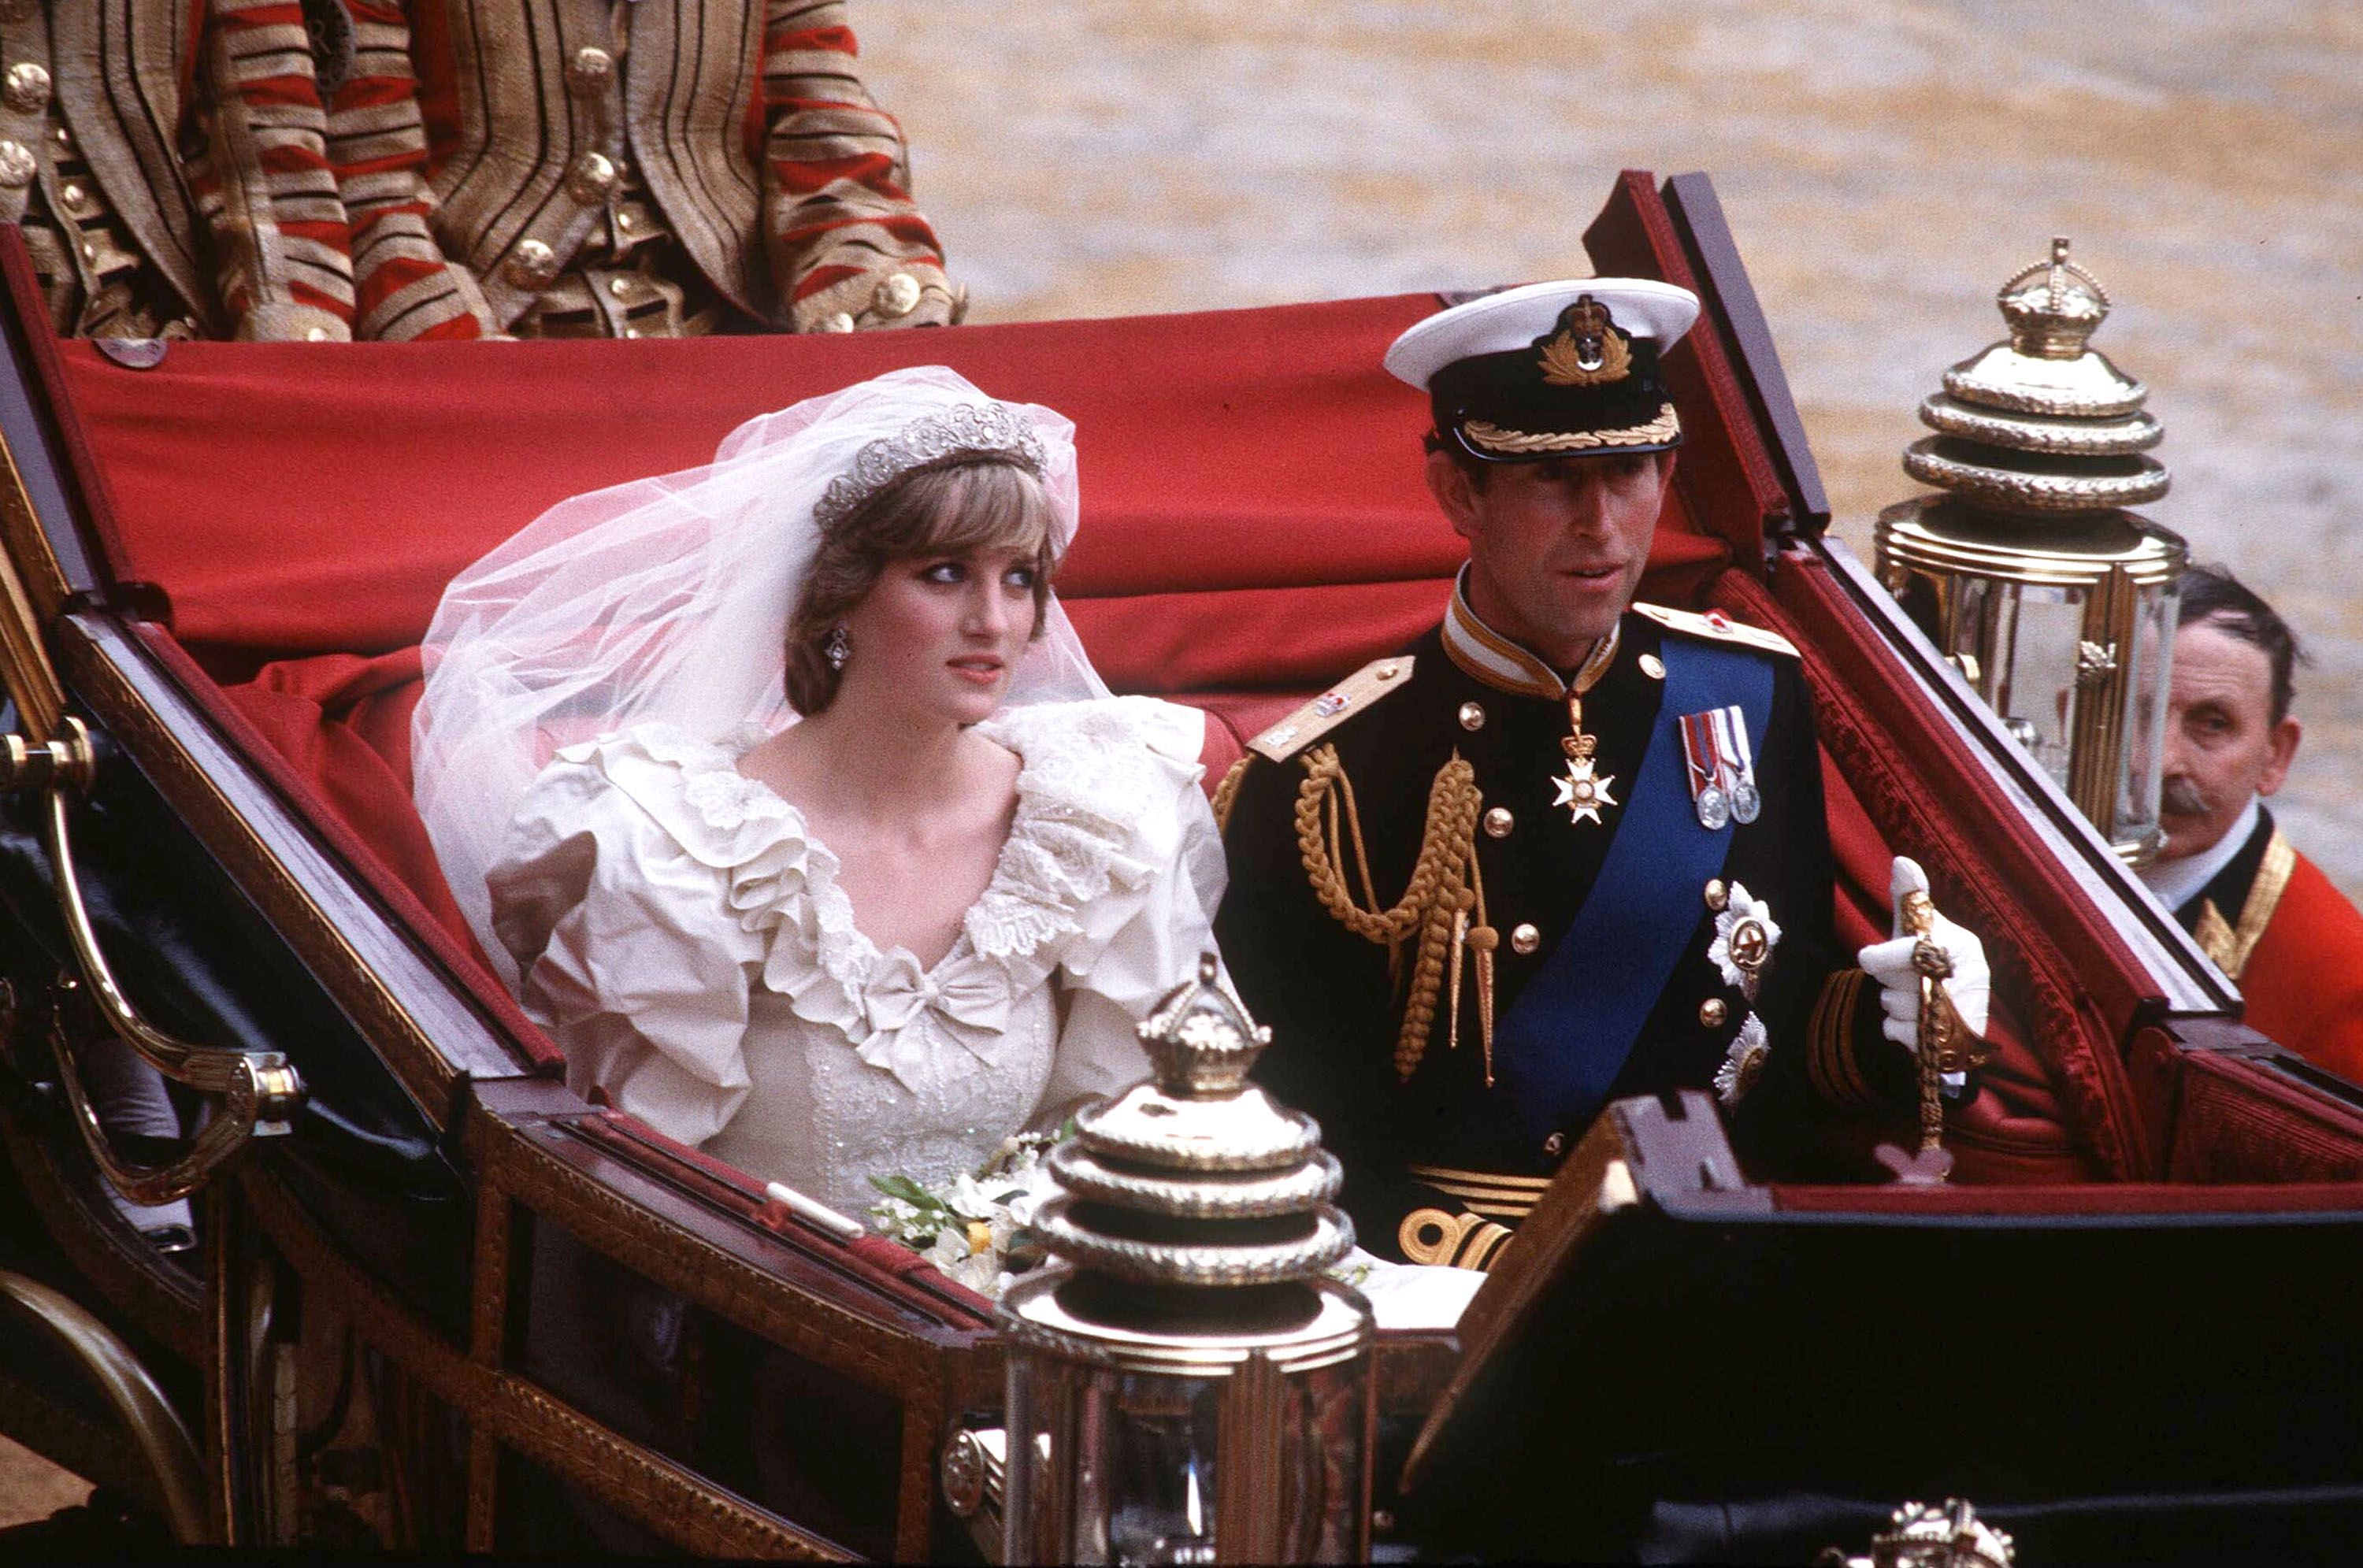 Prince Charles and Princess Diana on the way to Buckingham Palace after their wedding ceremony in London on July 29, 1981. | Photo: Getty Images